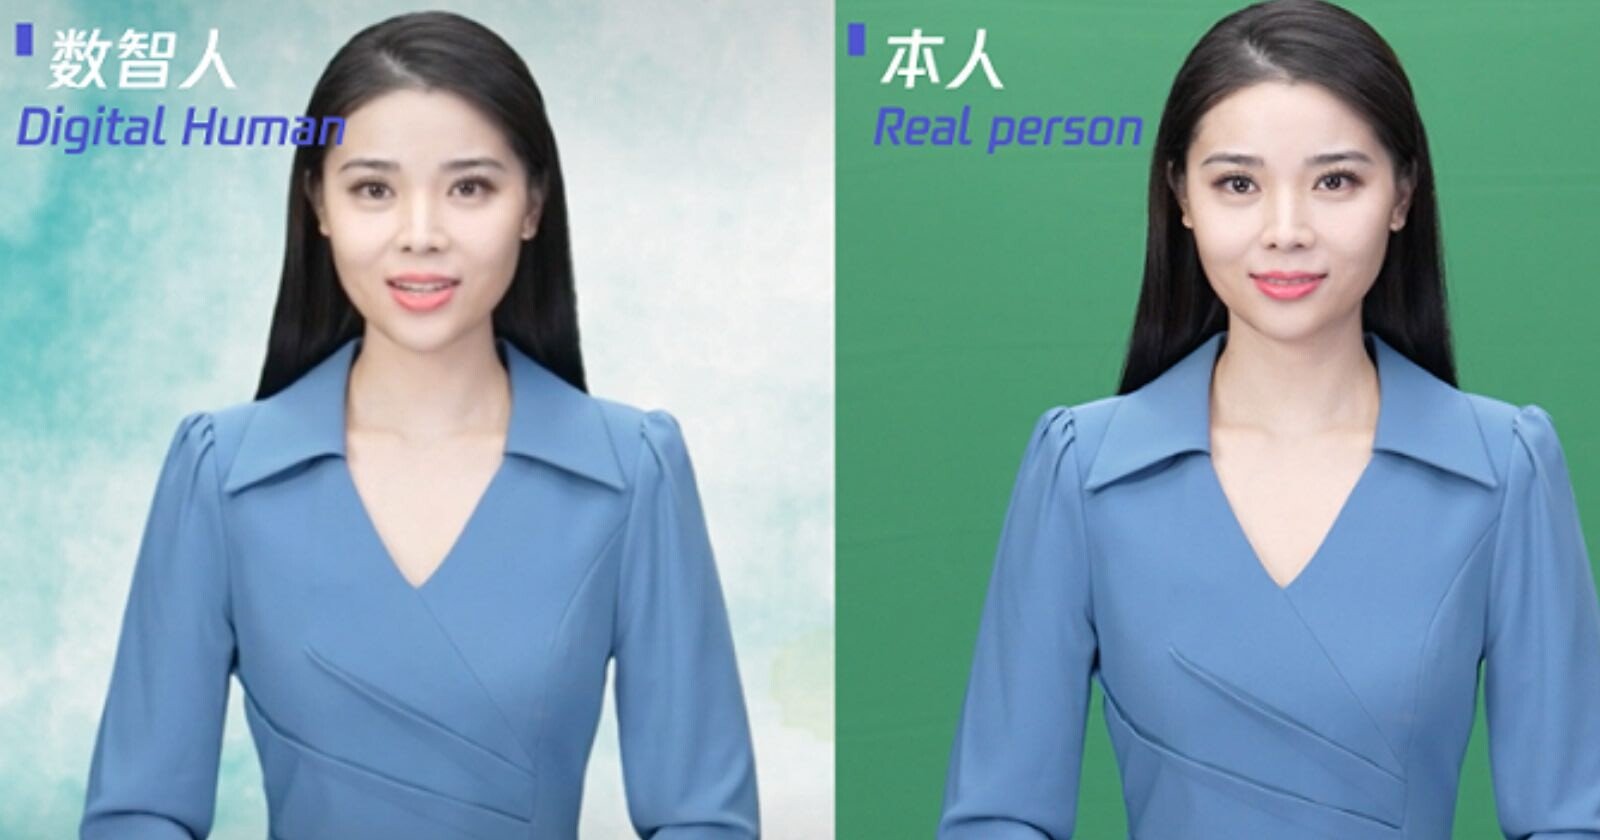 Chinese Company Lets You Make a Deepfake Digital Human for $145